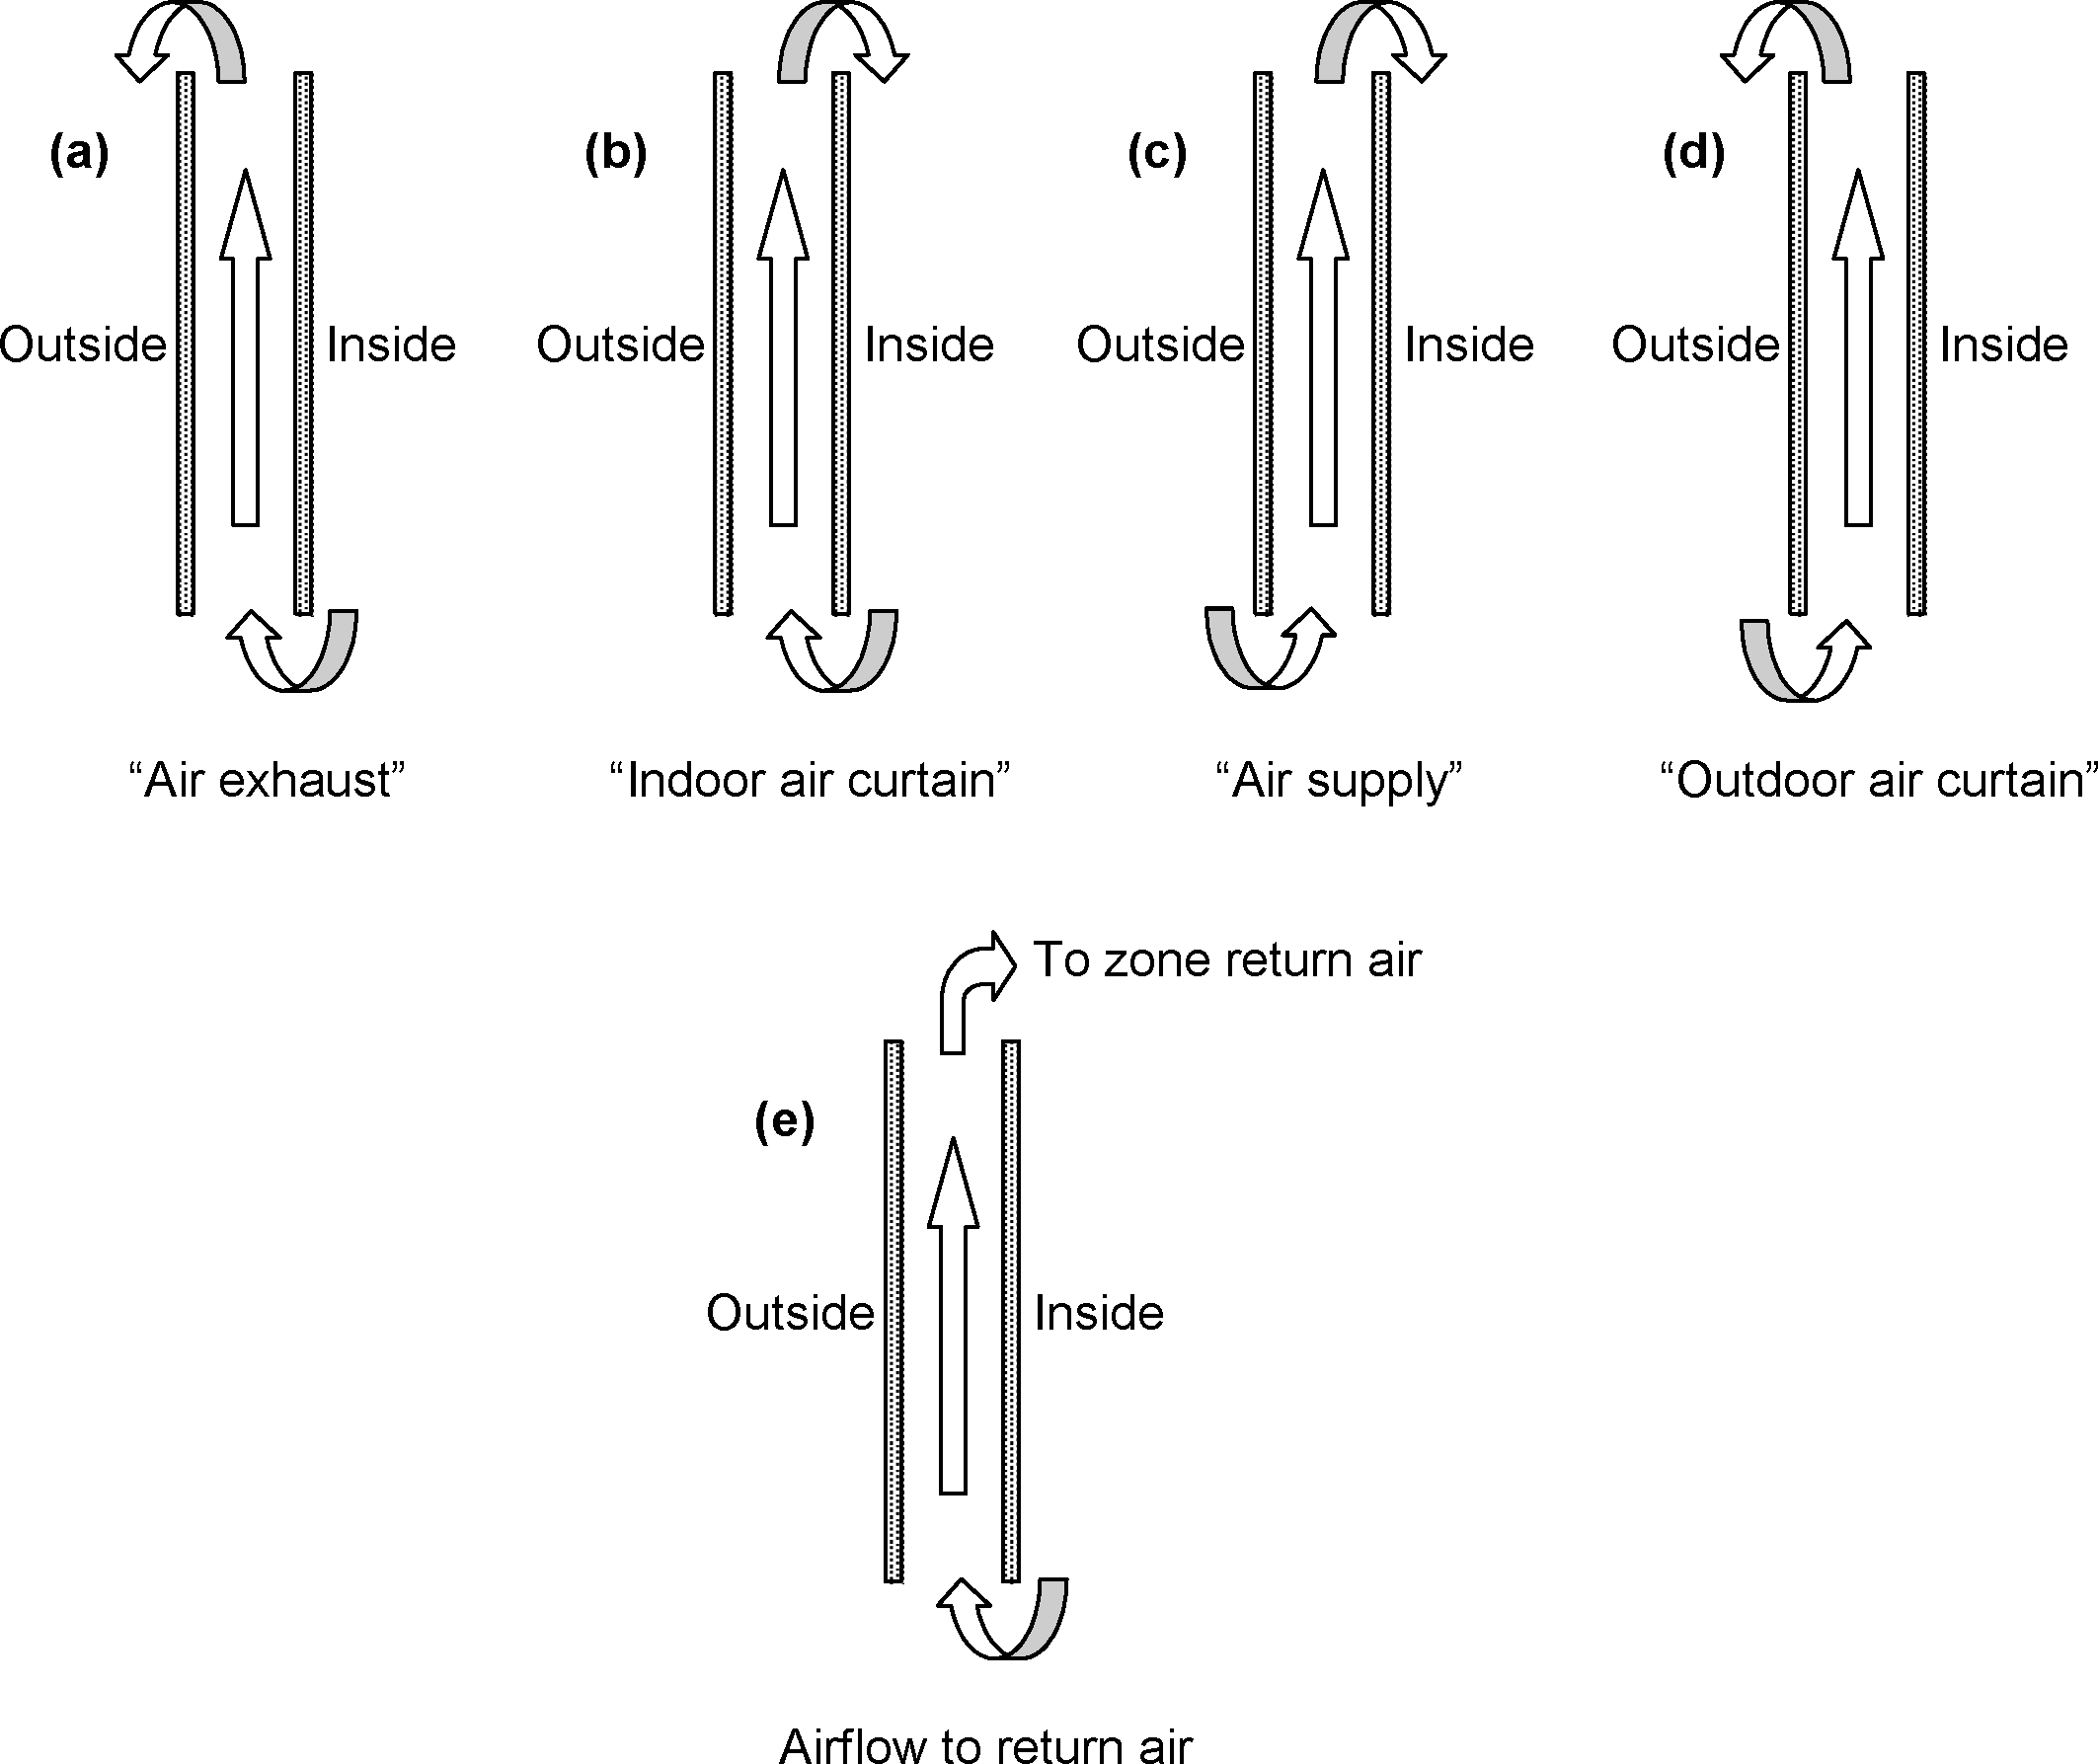 Gap airflow configurations for airflow windows. From Active facades, Version no. 1, Belgian Building Research Institute, June 2002. [fig:gap-airflow-configurations-for-airflow]